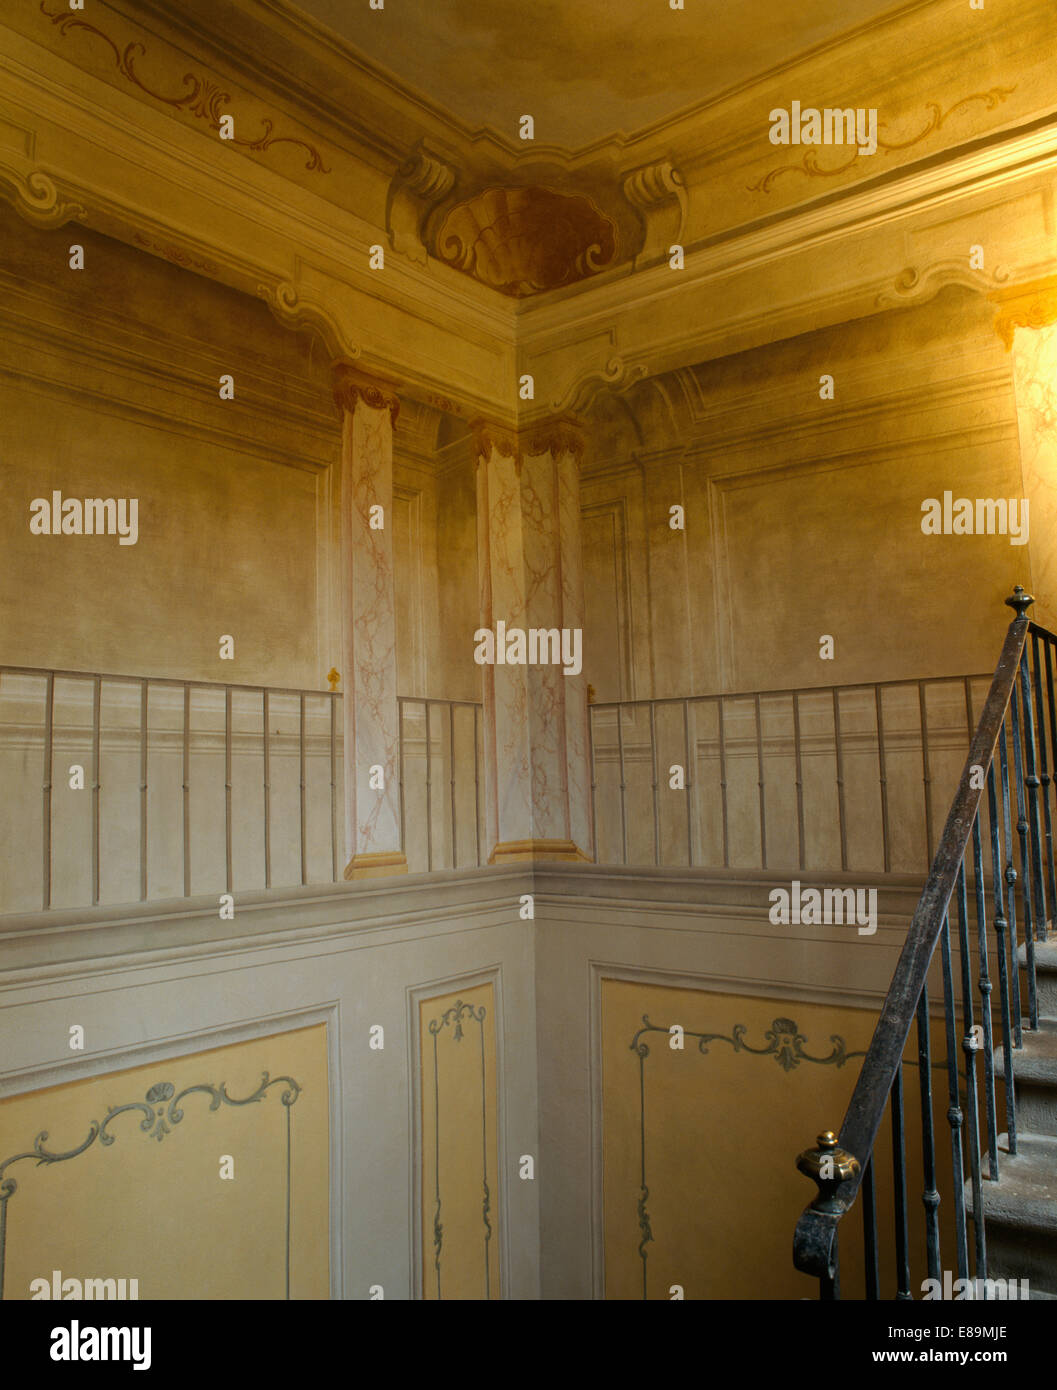 Trompe l'oeil painted walls in large Tuscan hall with metal banisters on staircase Stock Photo